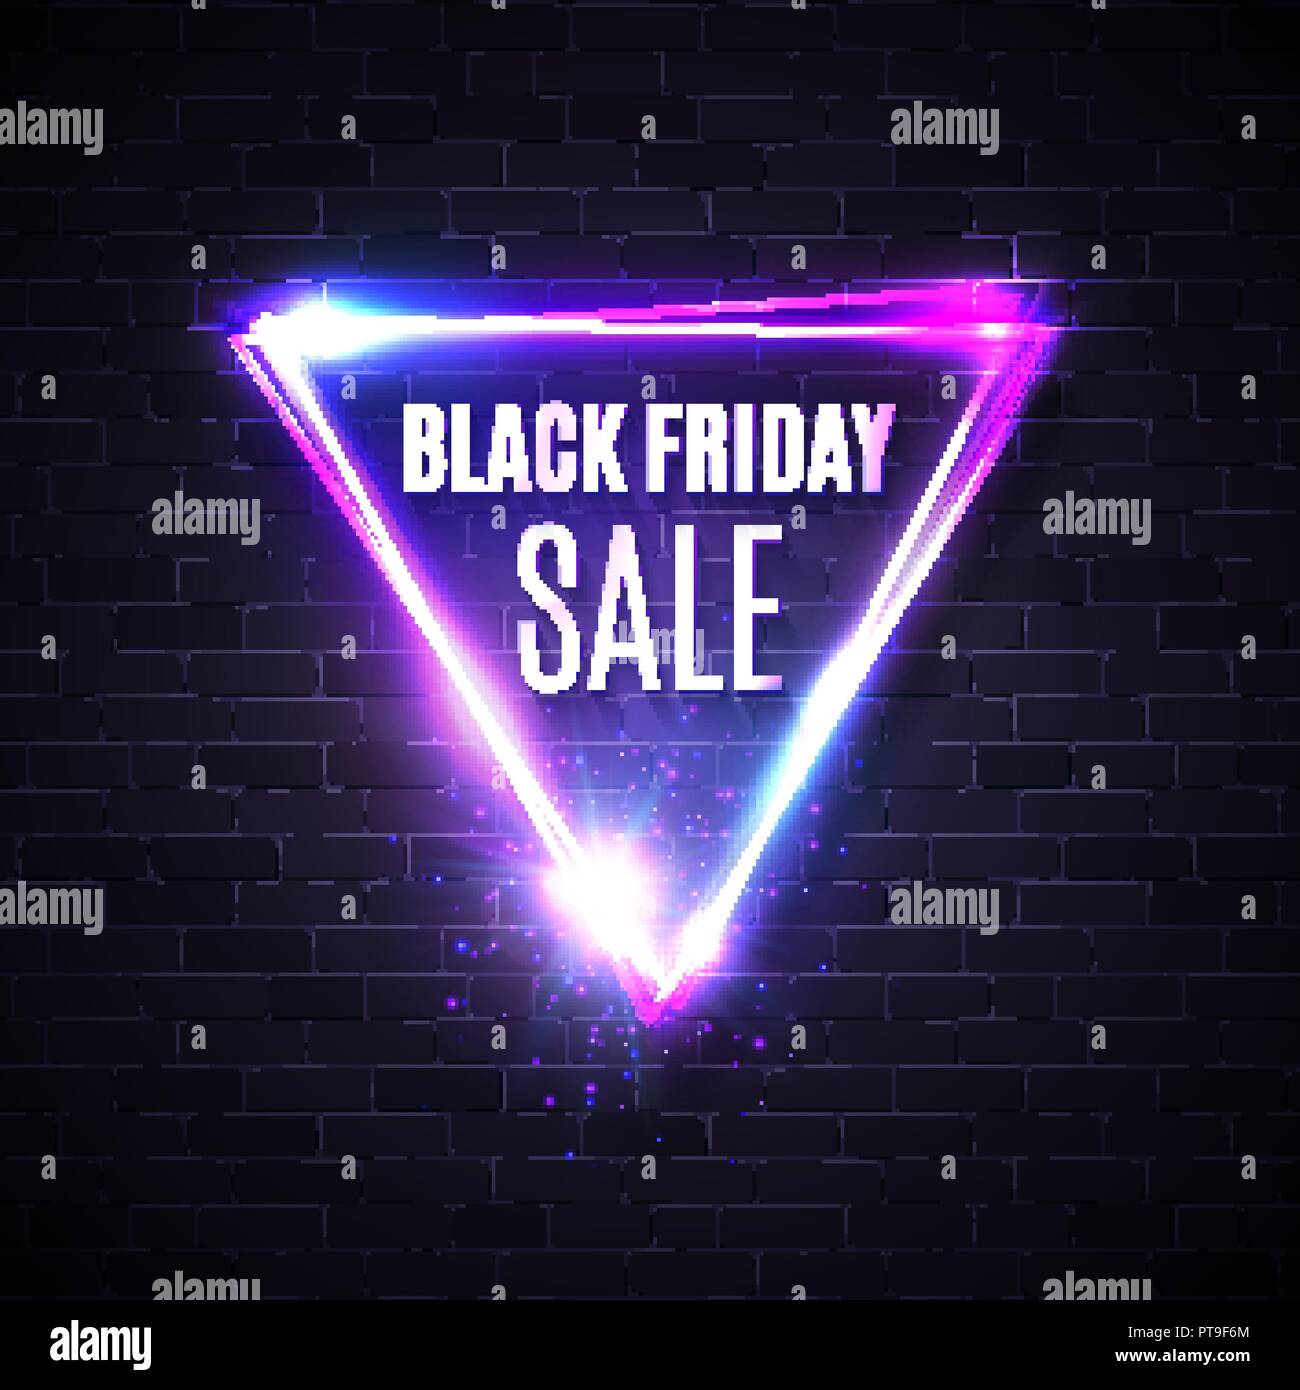 Black friday banner. Neon triangle background. Shining geometric shape. Glowing tag. Modern shopping sign on brick backdrop. Black friday sales design. Electric vector illustration. Stock Vector